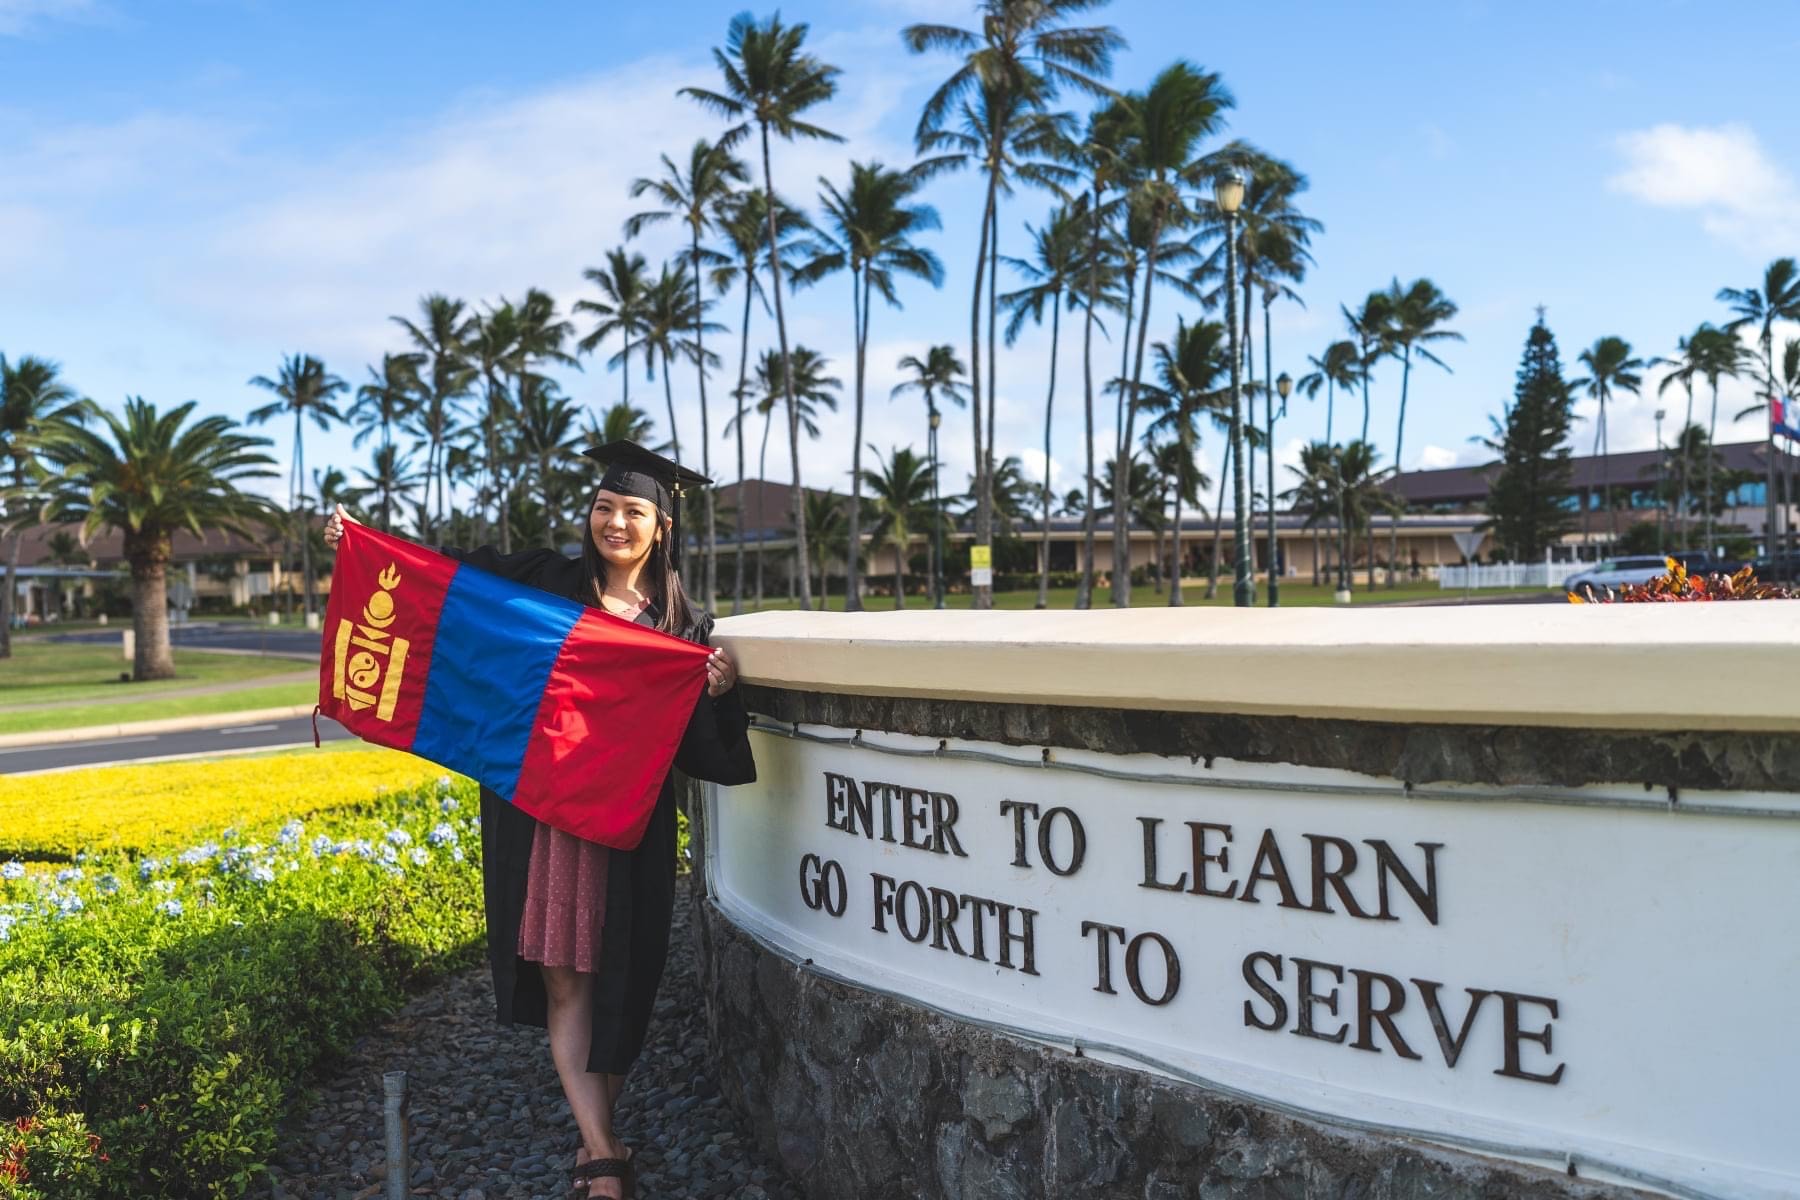 Marla Chinbold in front of a sign saying "enter to learn, go forth to serve" and holding the Mongolian flag while wearing a cap and gown.